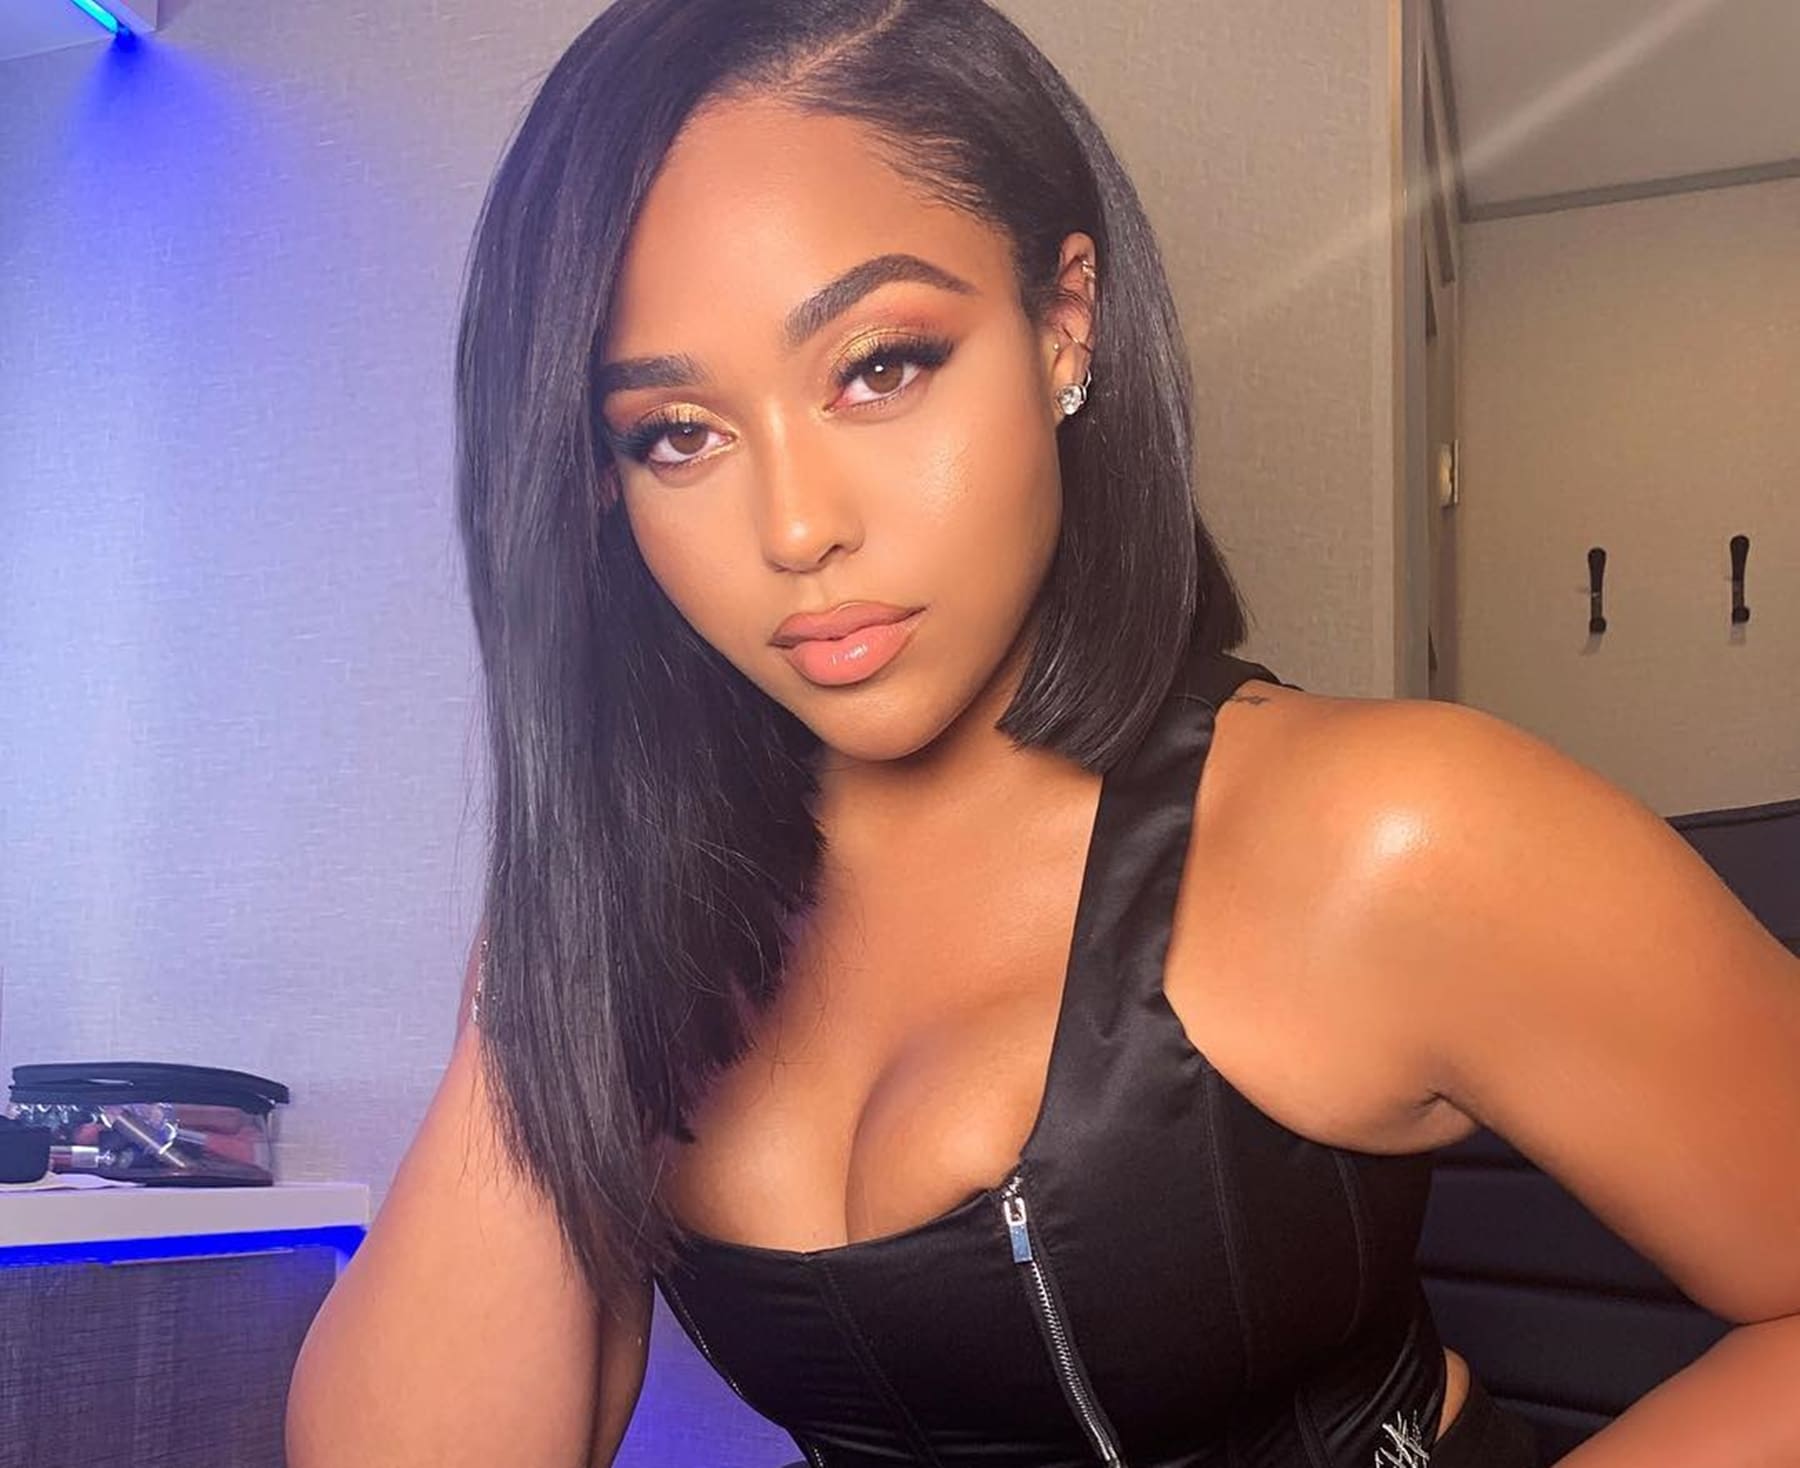 jordyn-woods-is-trying-out-some-juicy-outfits-for-this-thanksgiving